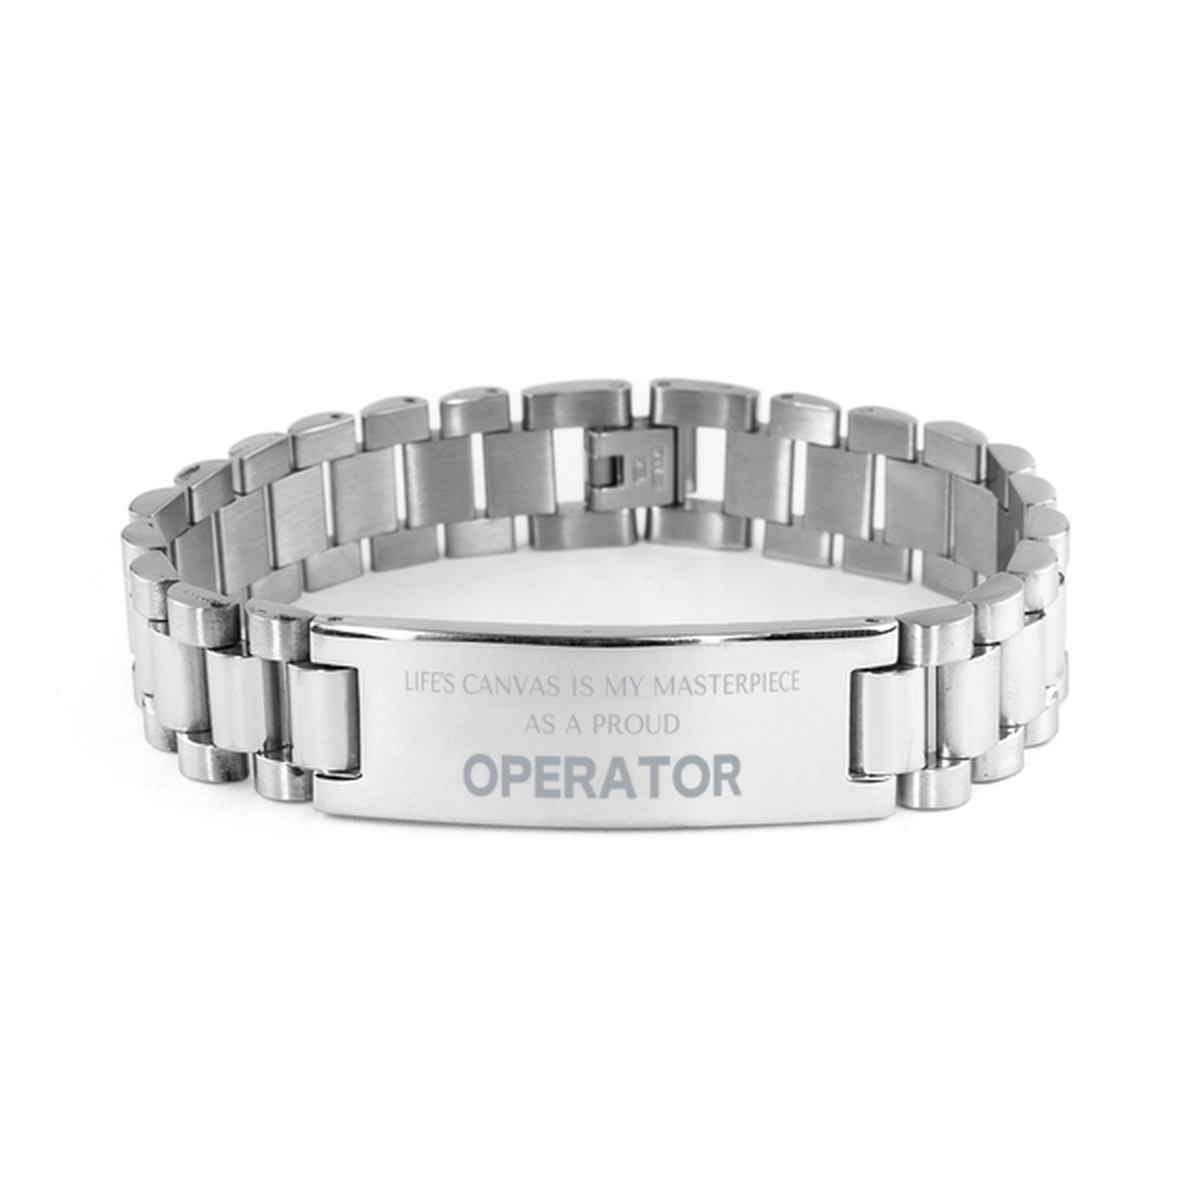 Proud Operator Gifts, Life's canvas is my masterpiece, Epic Birthday Christmas Unique Ladder Stainless Steel Bracelet For Operator, Coworkers, Men, Women, Friends